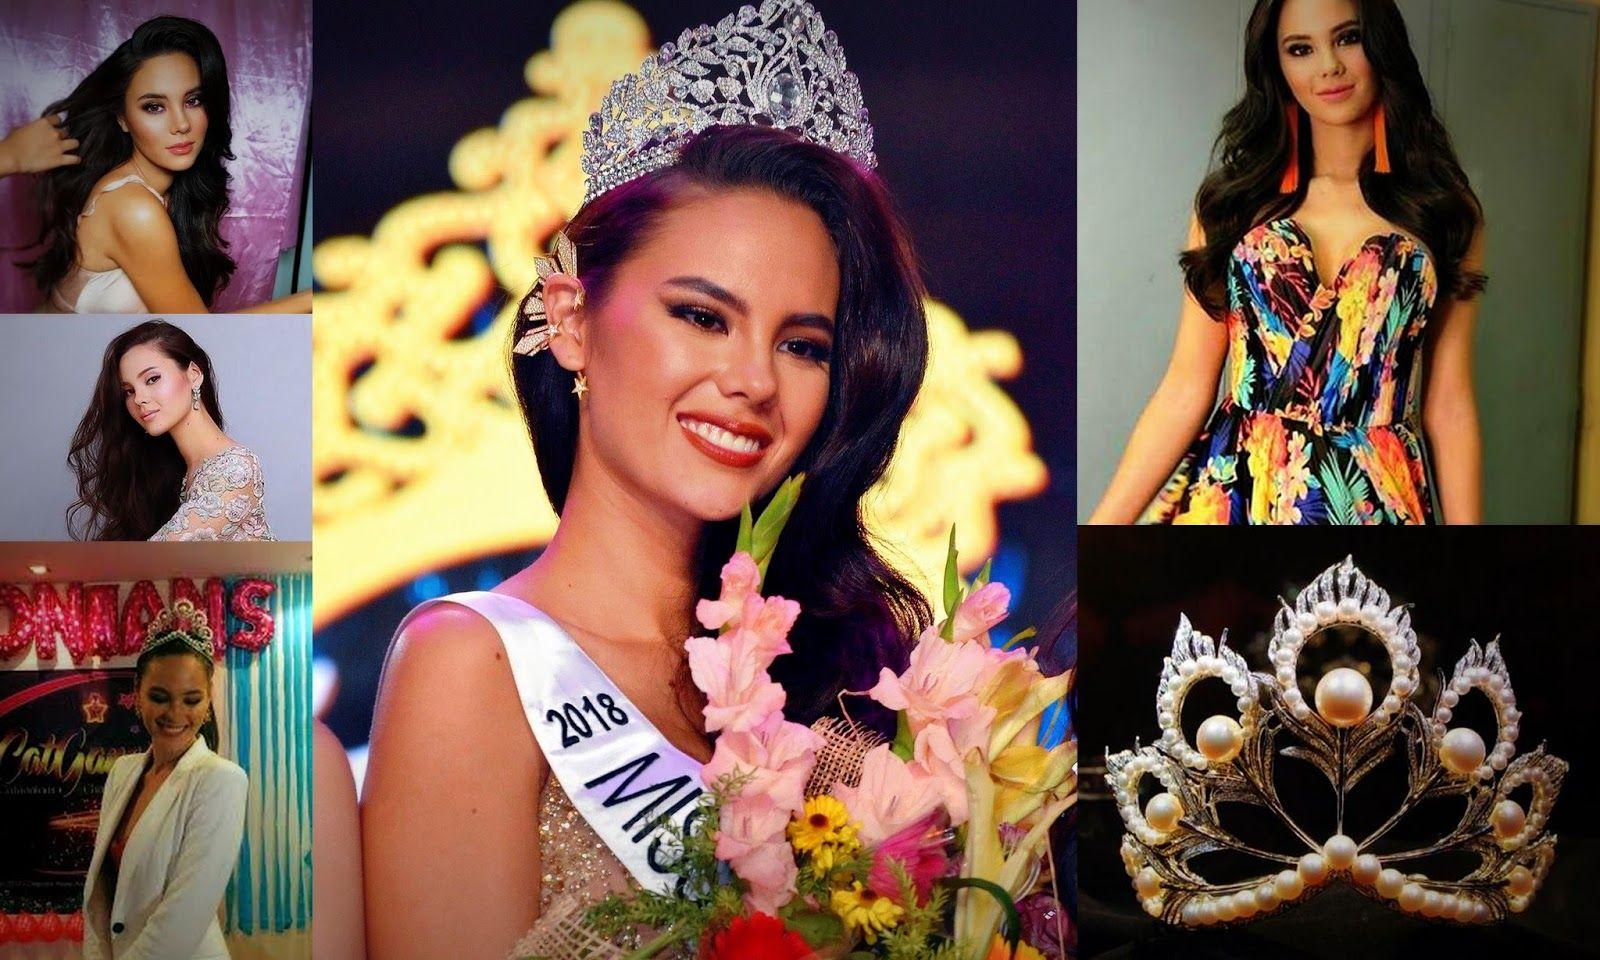 What are the chances of Catriona Gray for Miss Universe 2018?